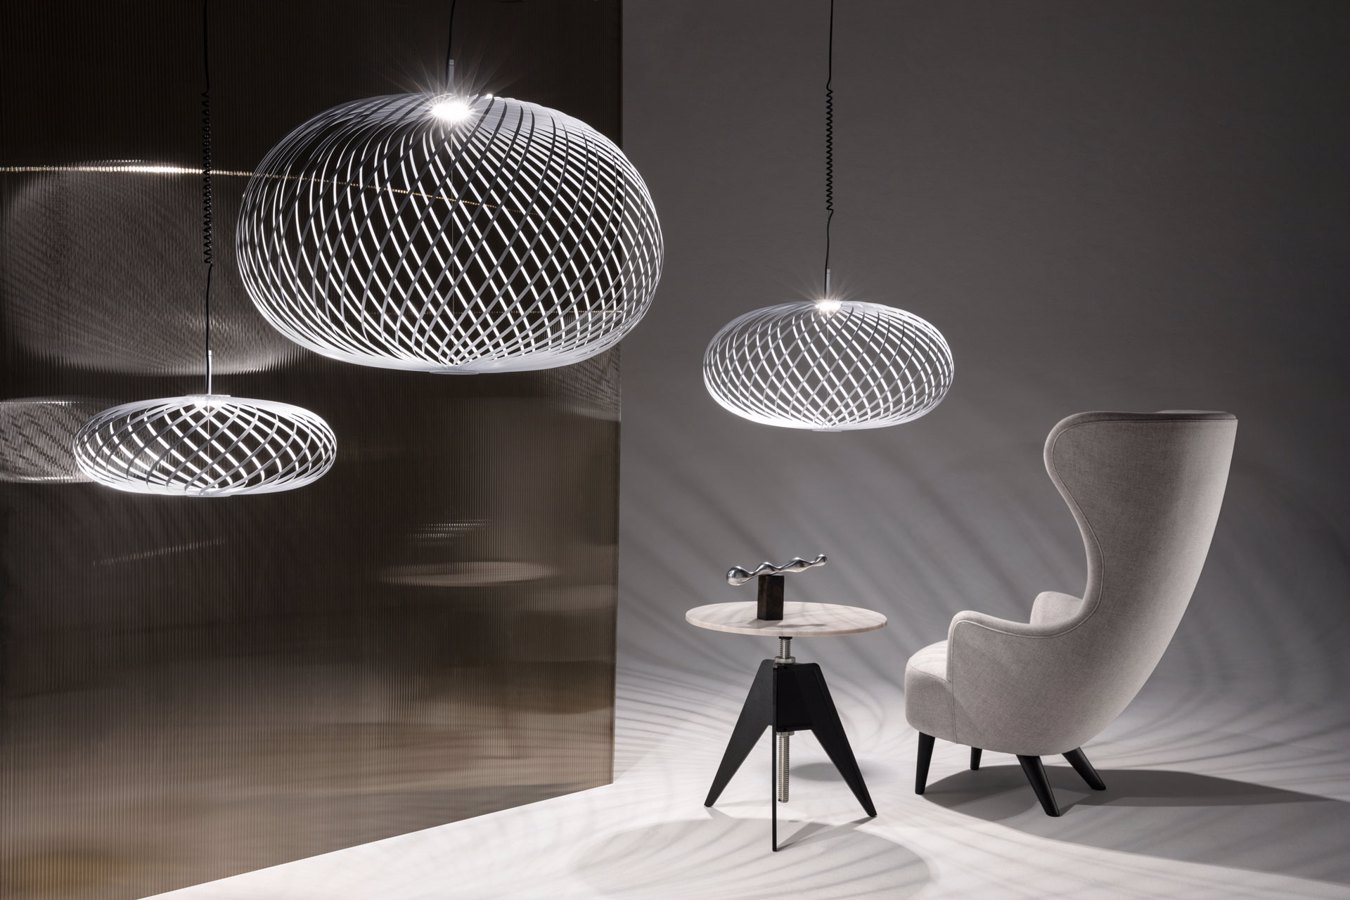 LED lighting collections by Tom Dixon